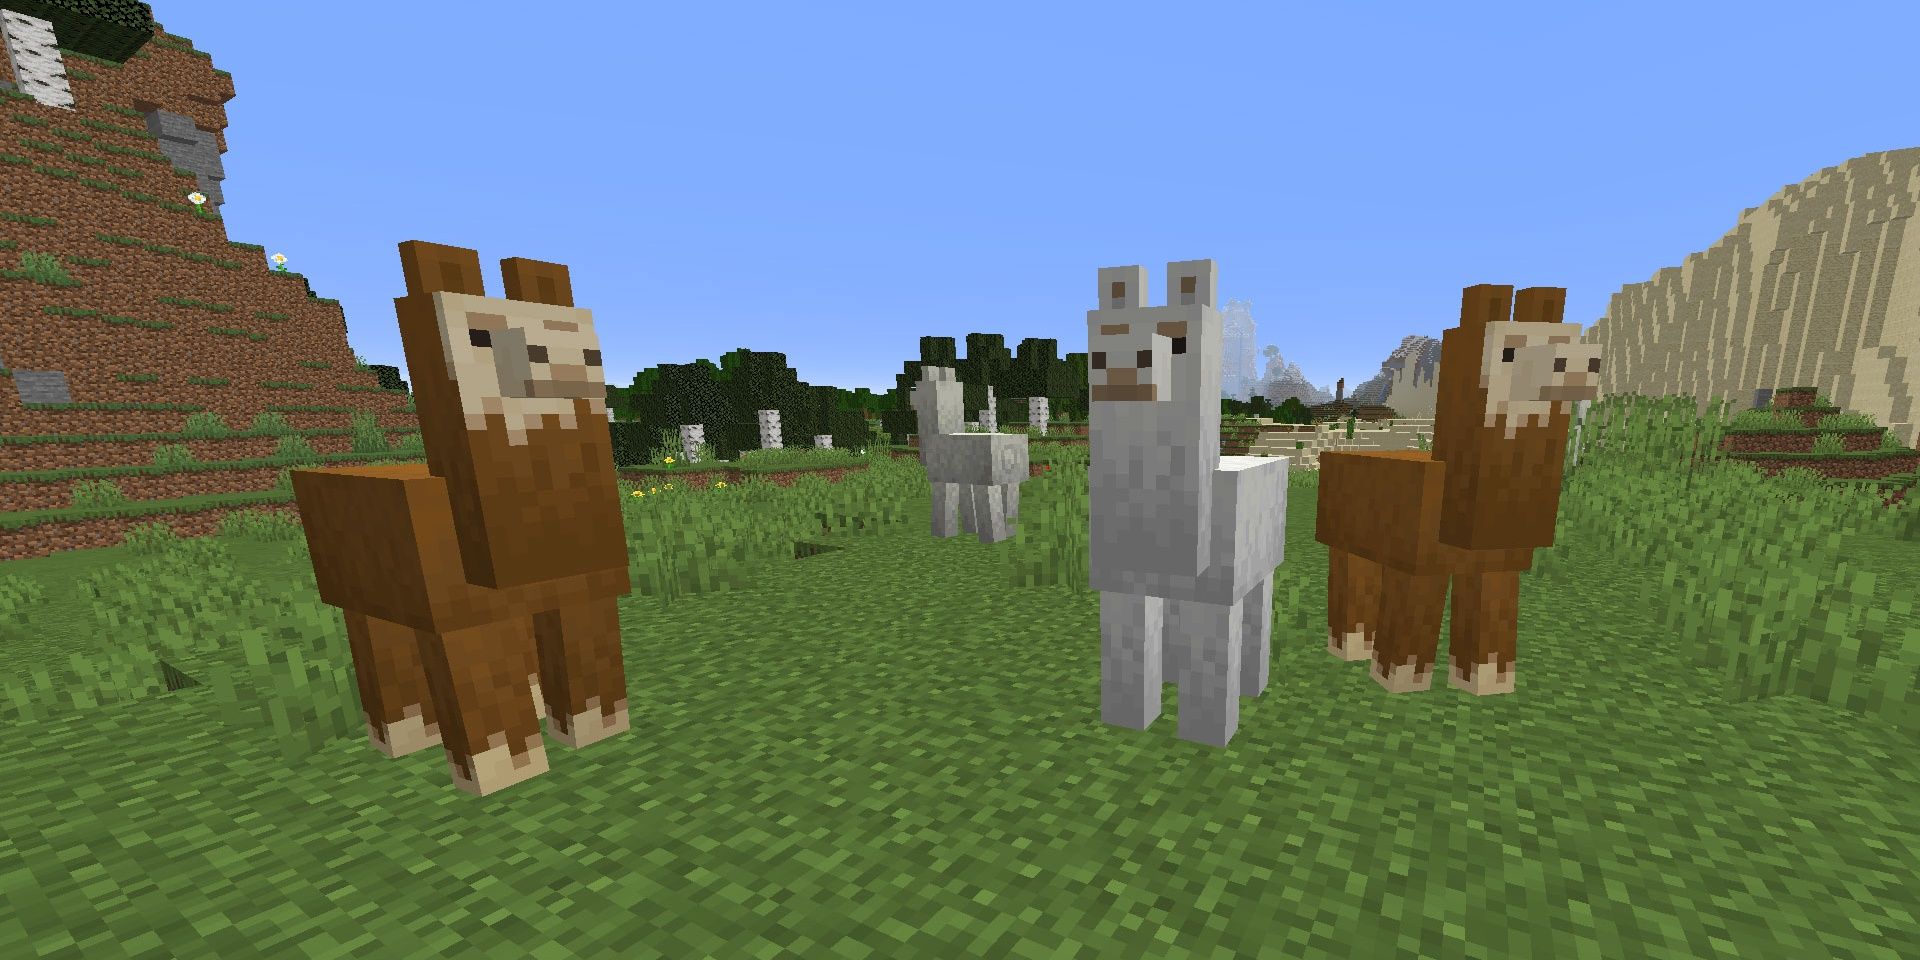 Llamas in a pack in Minecraft